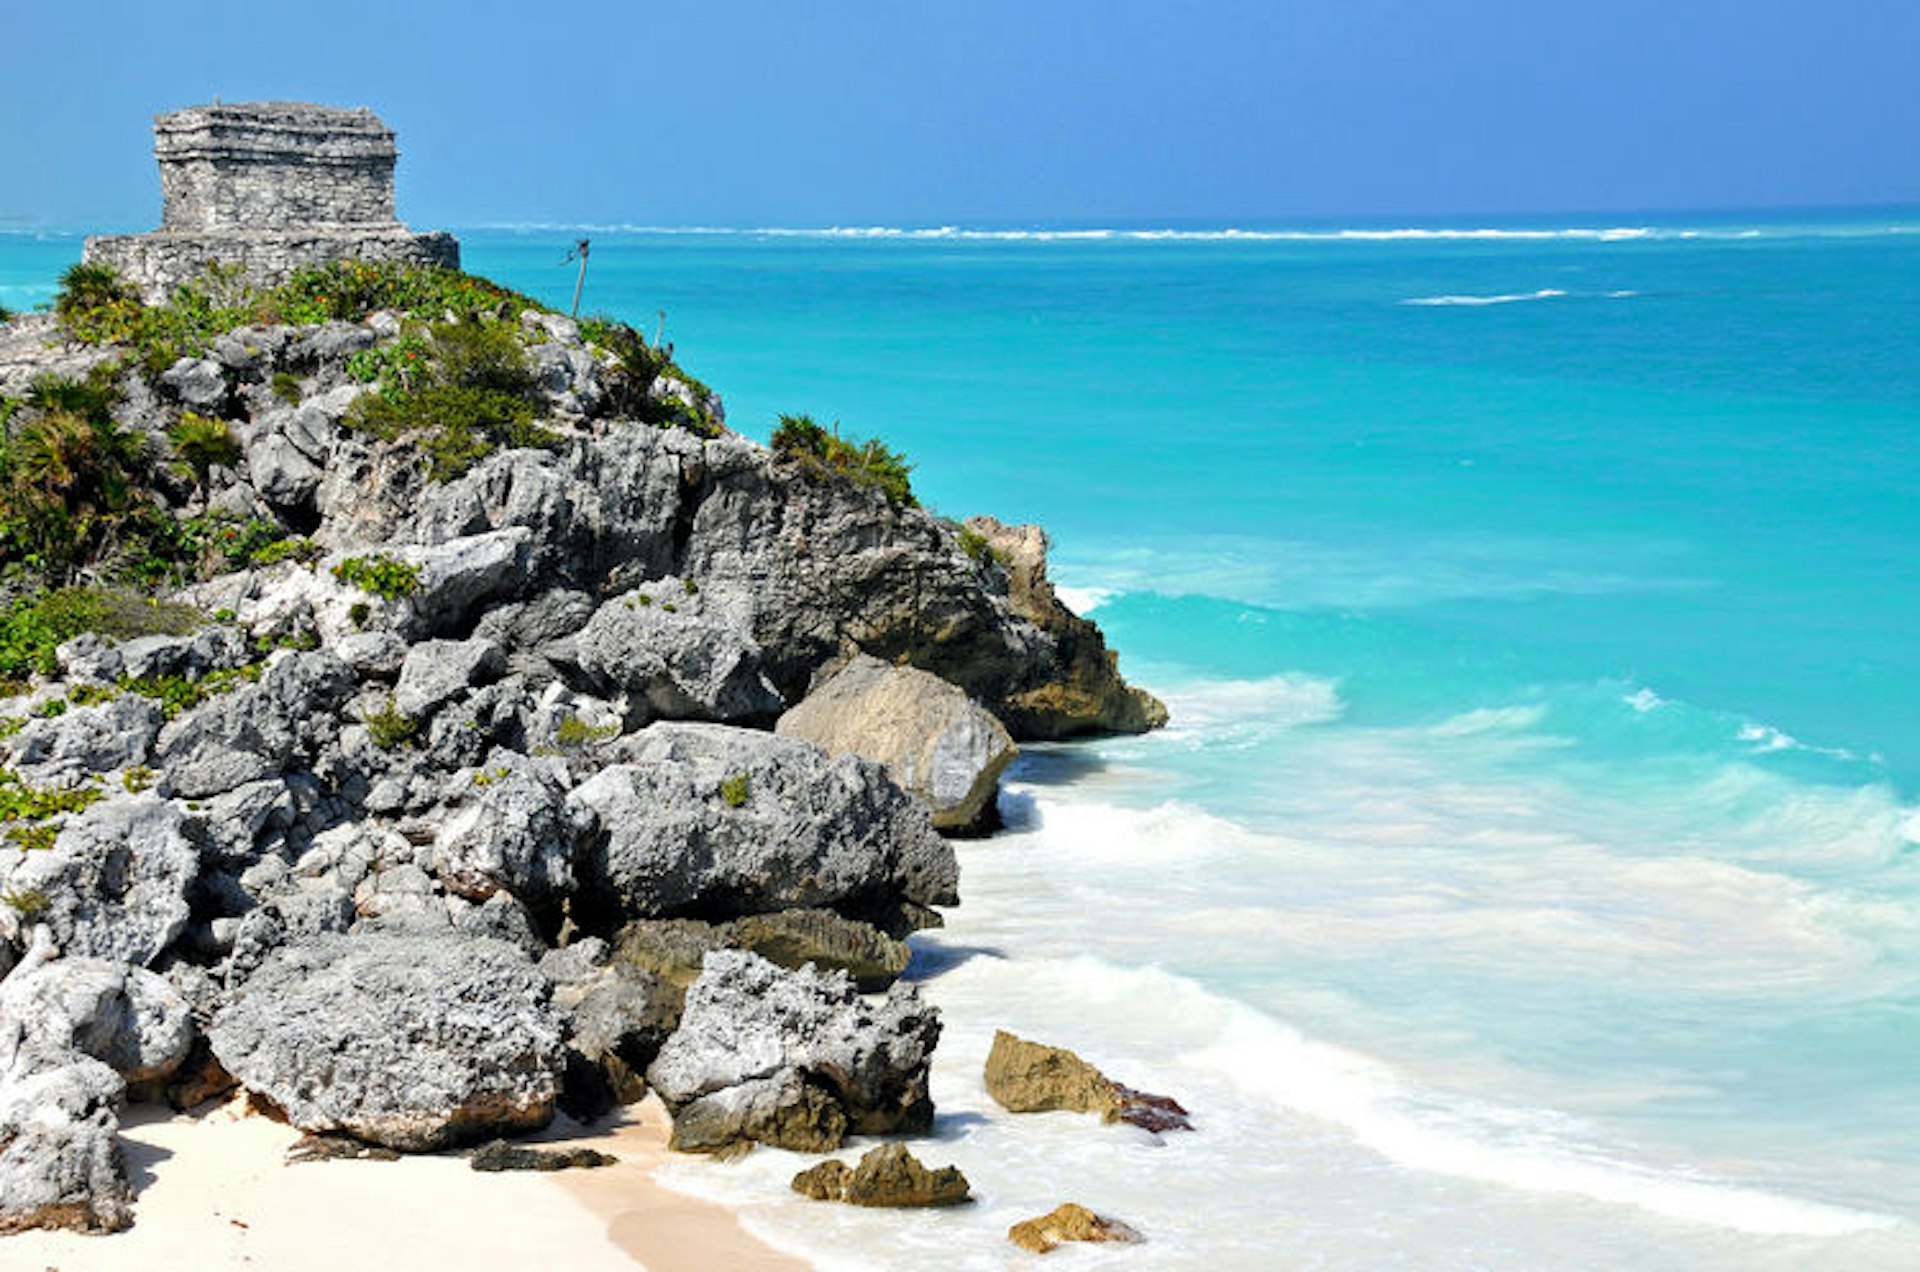 Tulum's combination of centuries-old ruins and a stunningly beautiful setting make it a firm favorite with visitors. Image by Dennis Jarvis / CC BY-SA 2.0